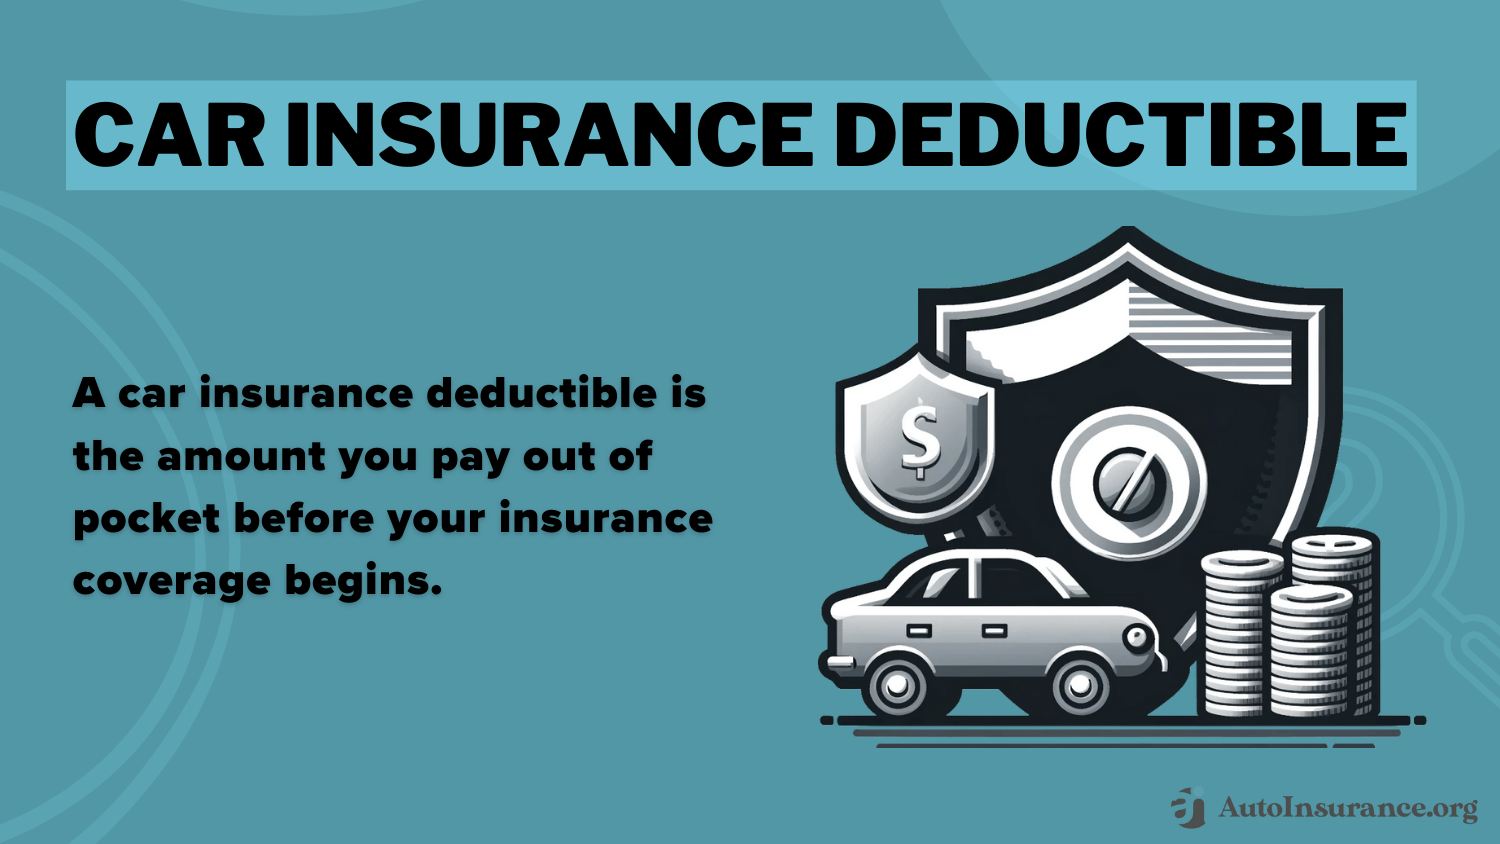 Car Insurance Deductible Definition Card: Does auto insurance cover hitting a pole?